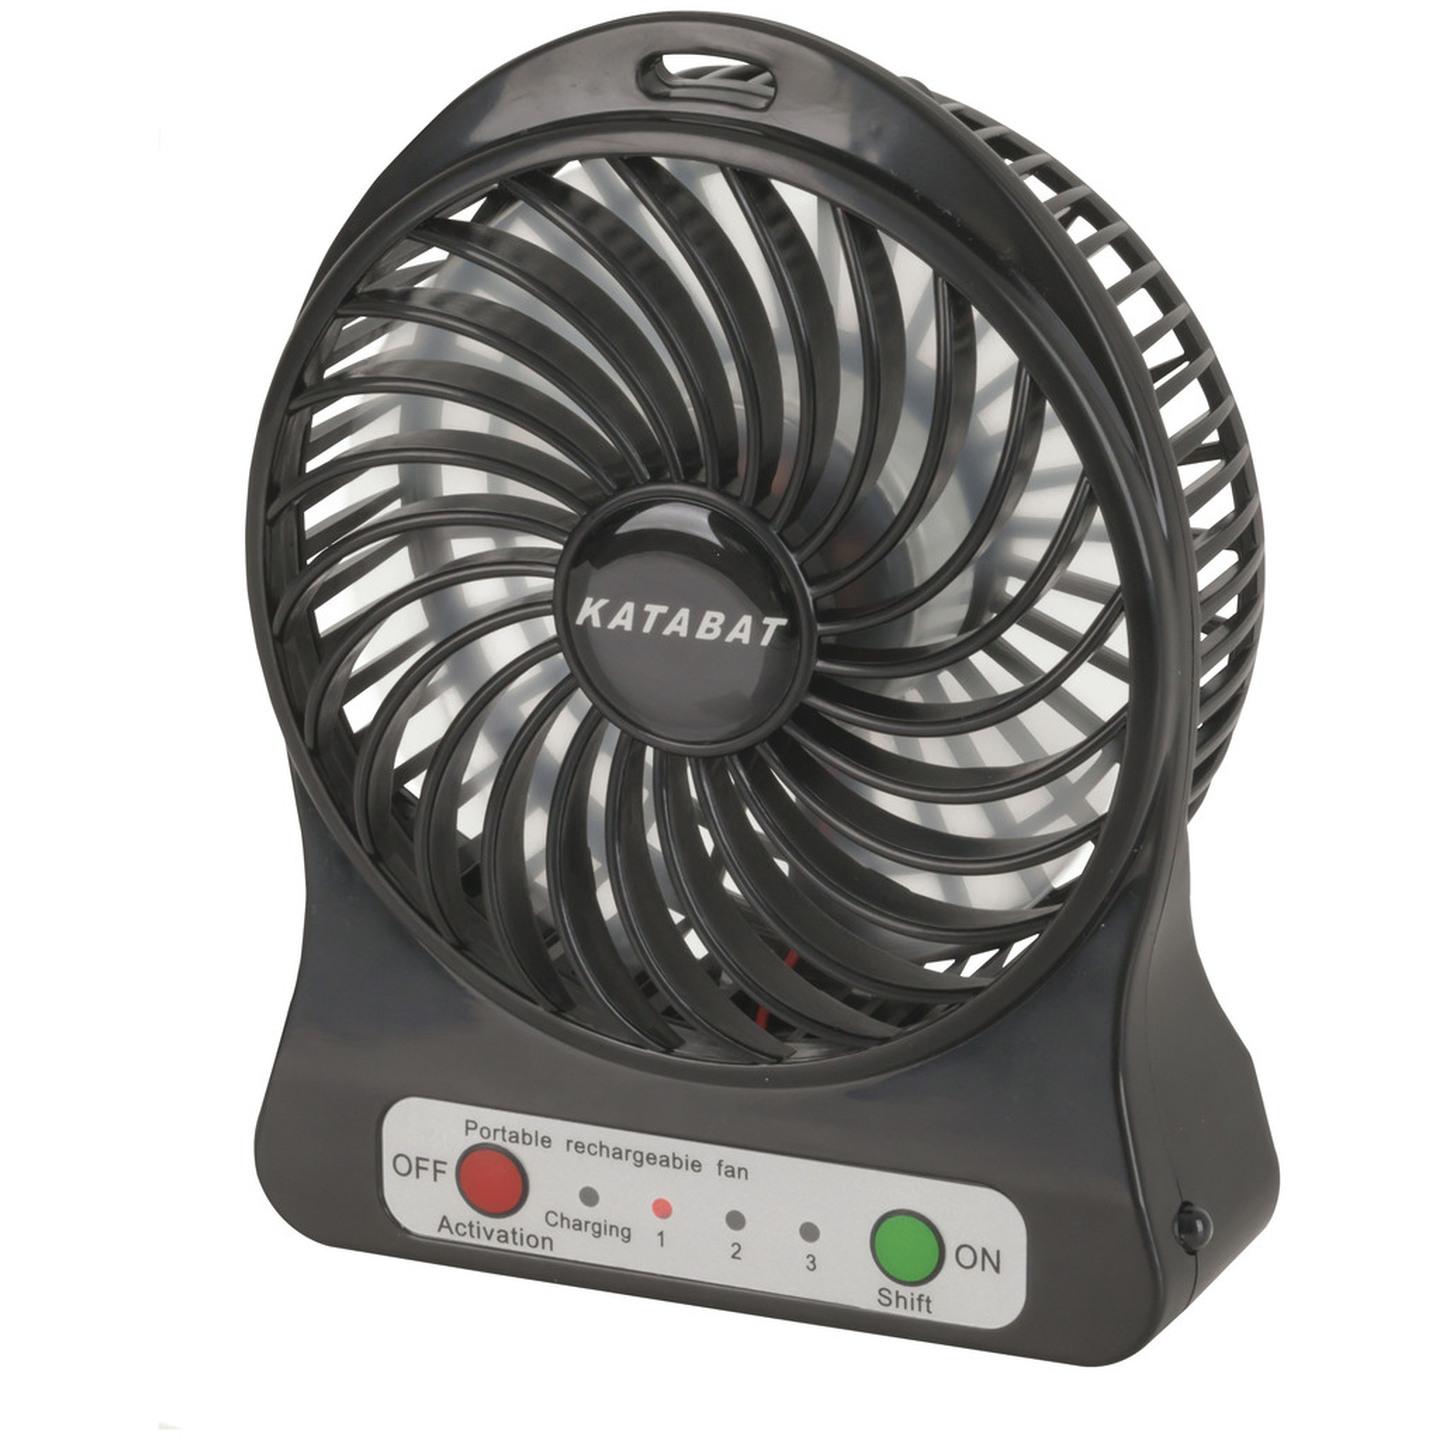 Mini USB Rechargeable 3 Speed Fan with LED Light - Black